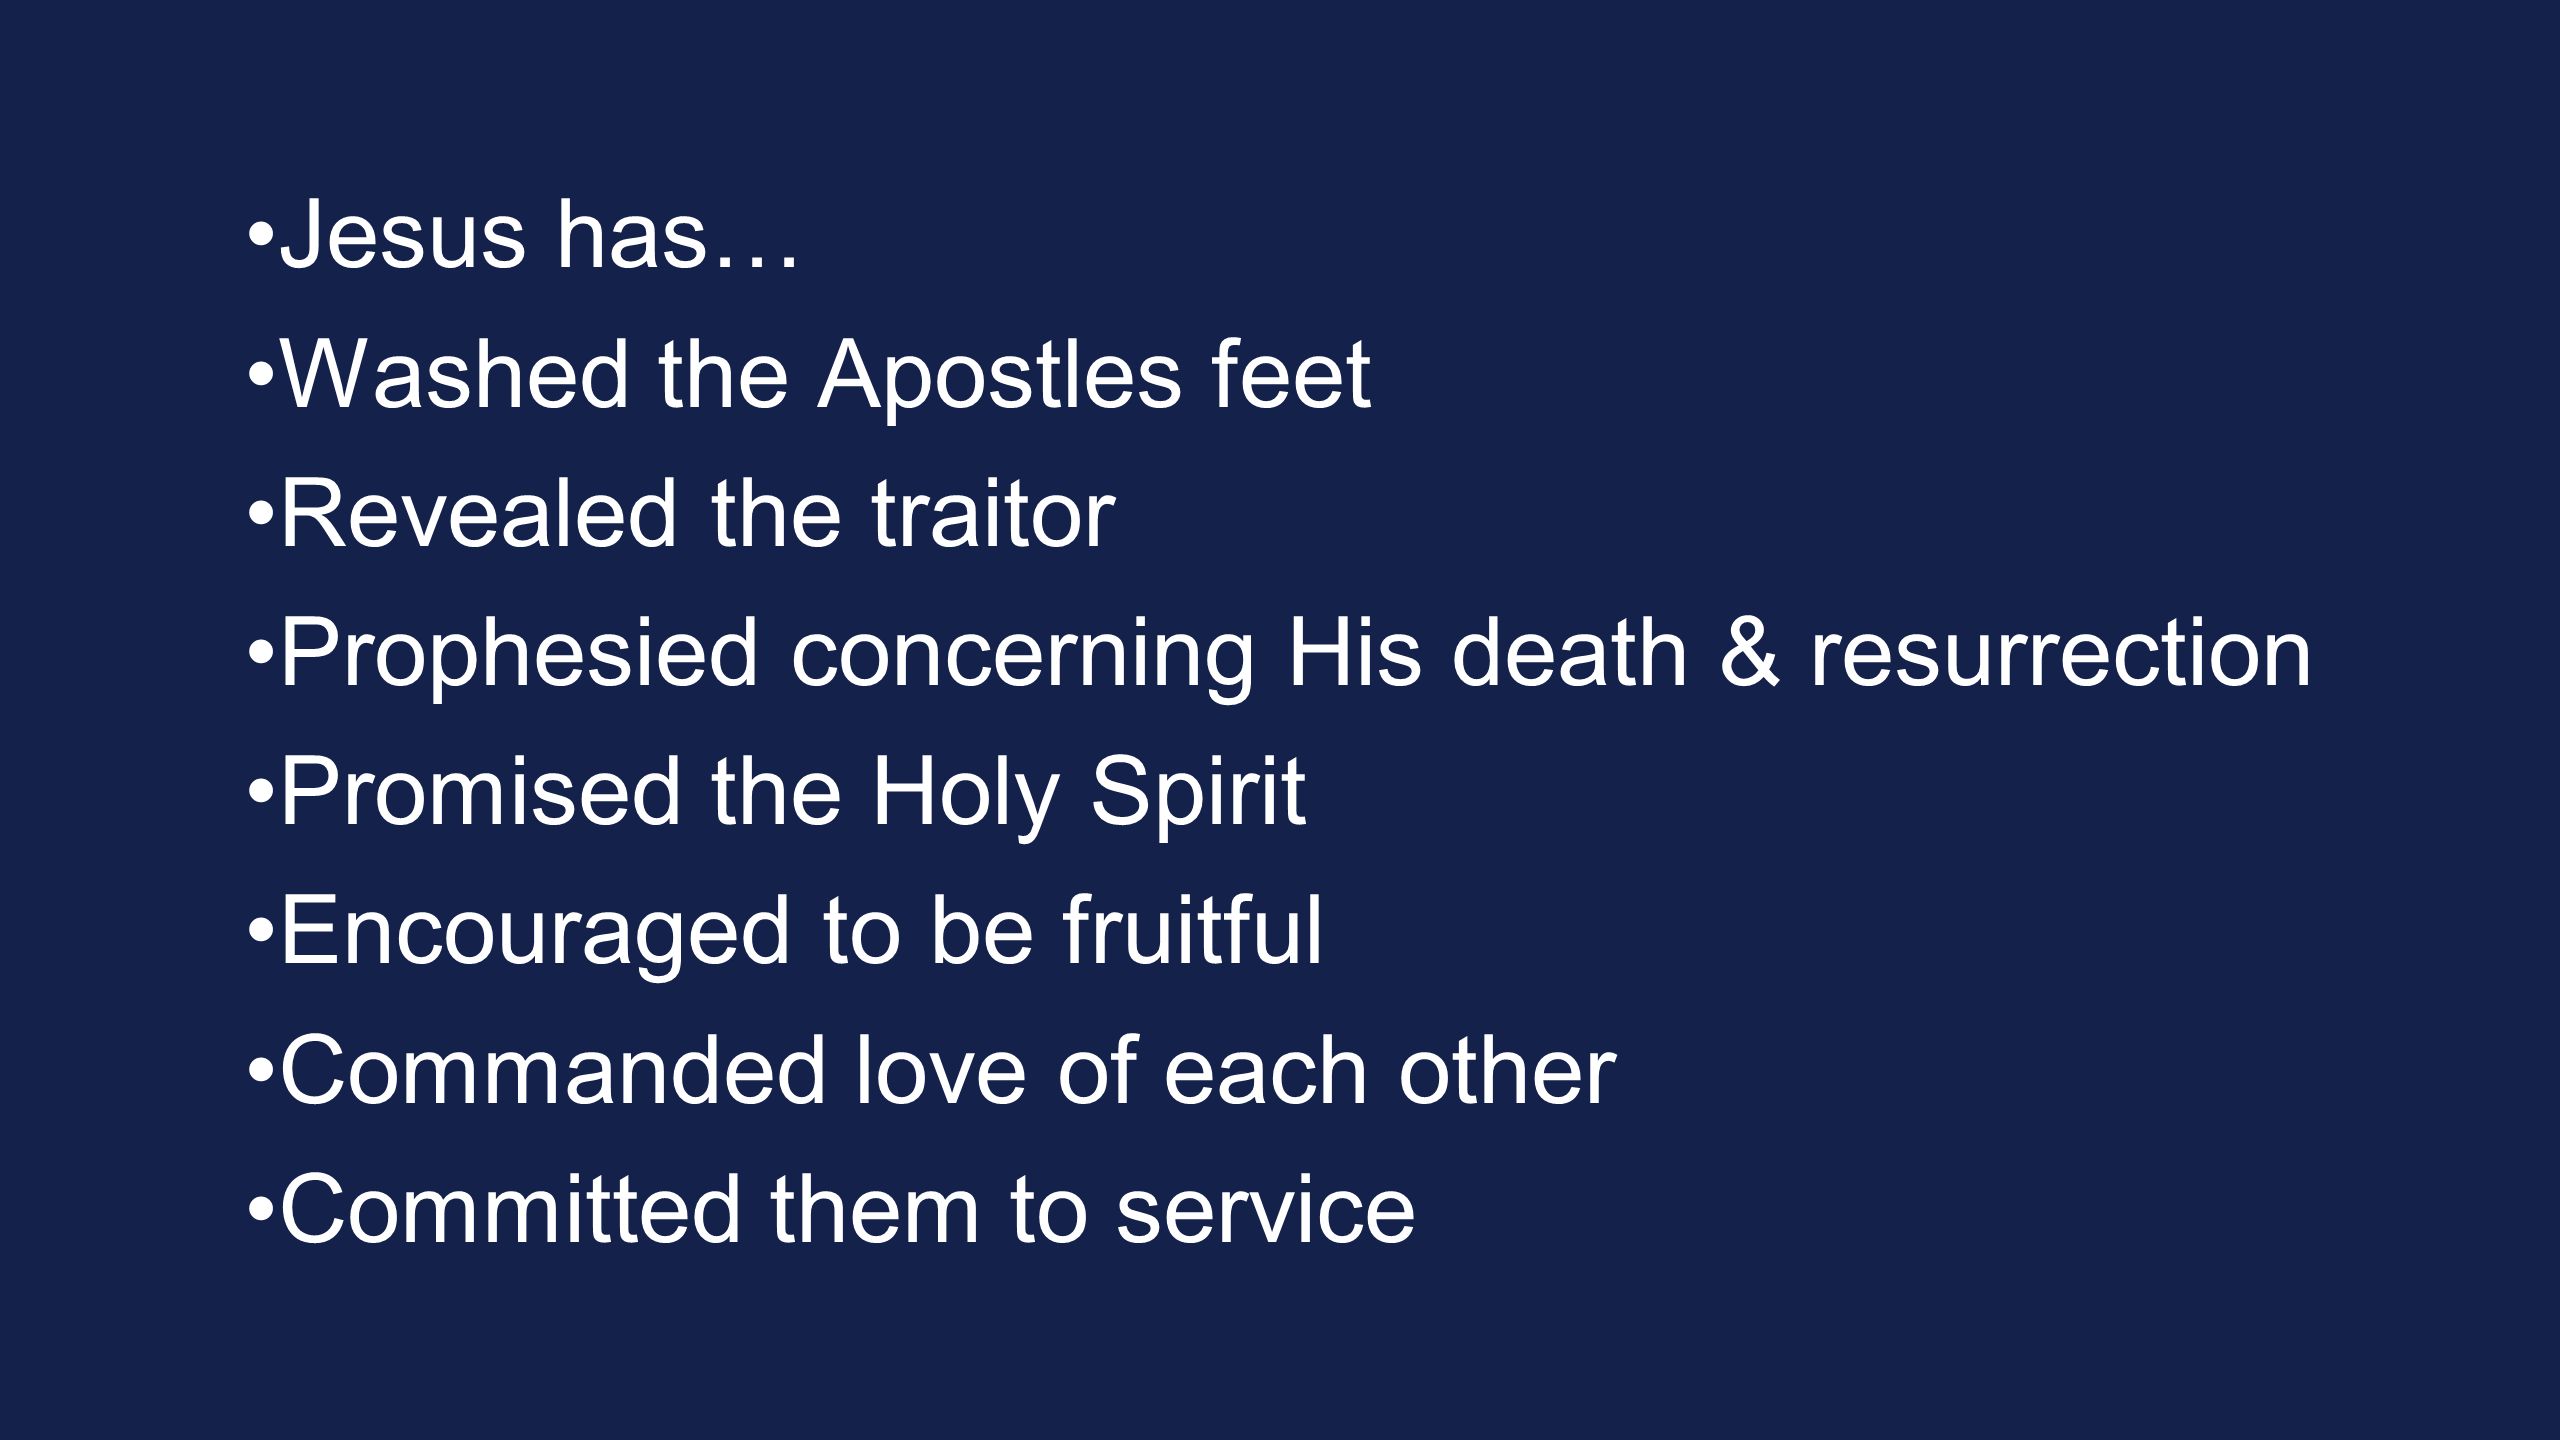 Jesus has… Washed the Apostles feet Revealed the traitor Prophesied concerning His death & resurrection Promised the Holy Spirit Encouraged to be fruitful Commanded love of each other Committed them to service